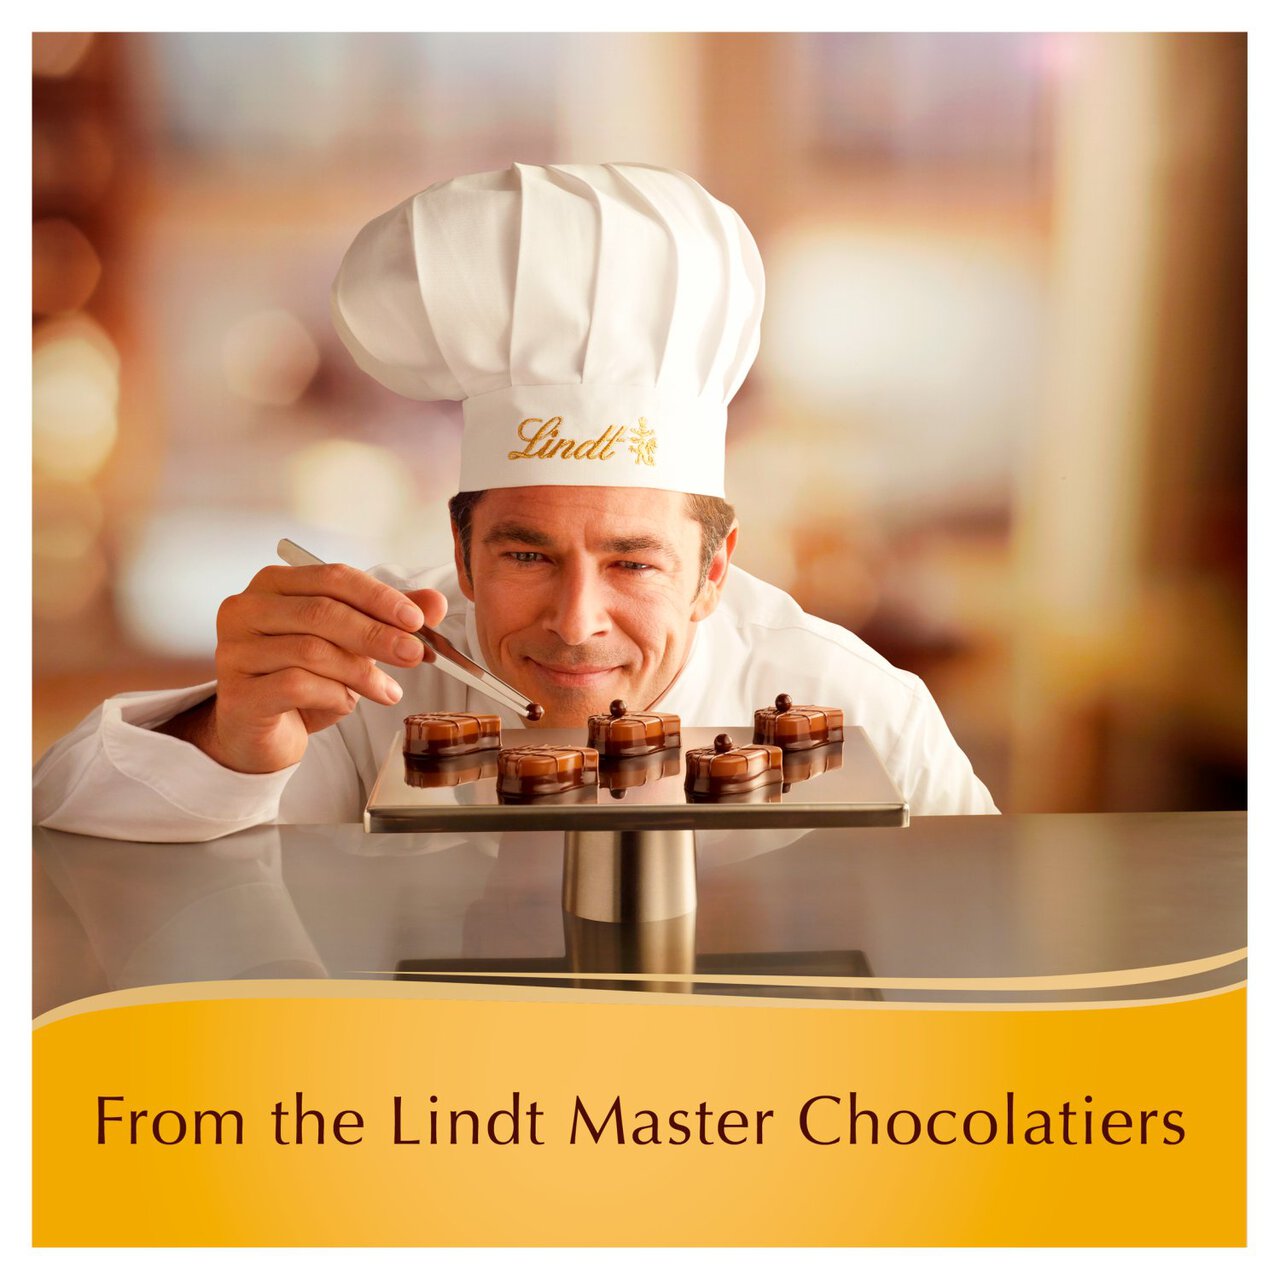 Lindt Swiss Luxury Selection 193g